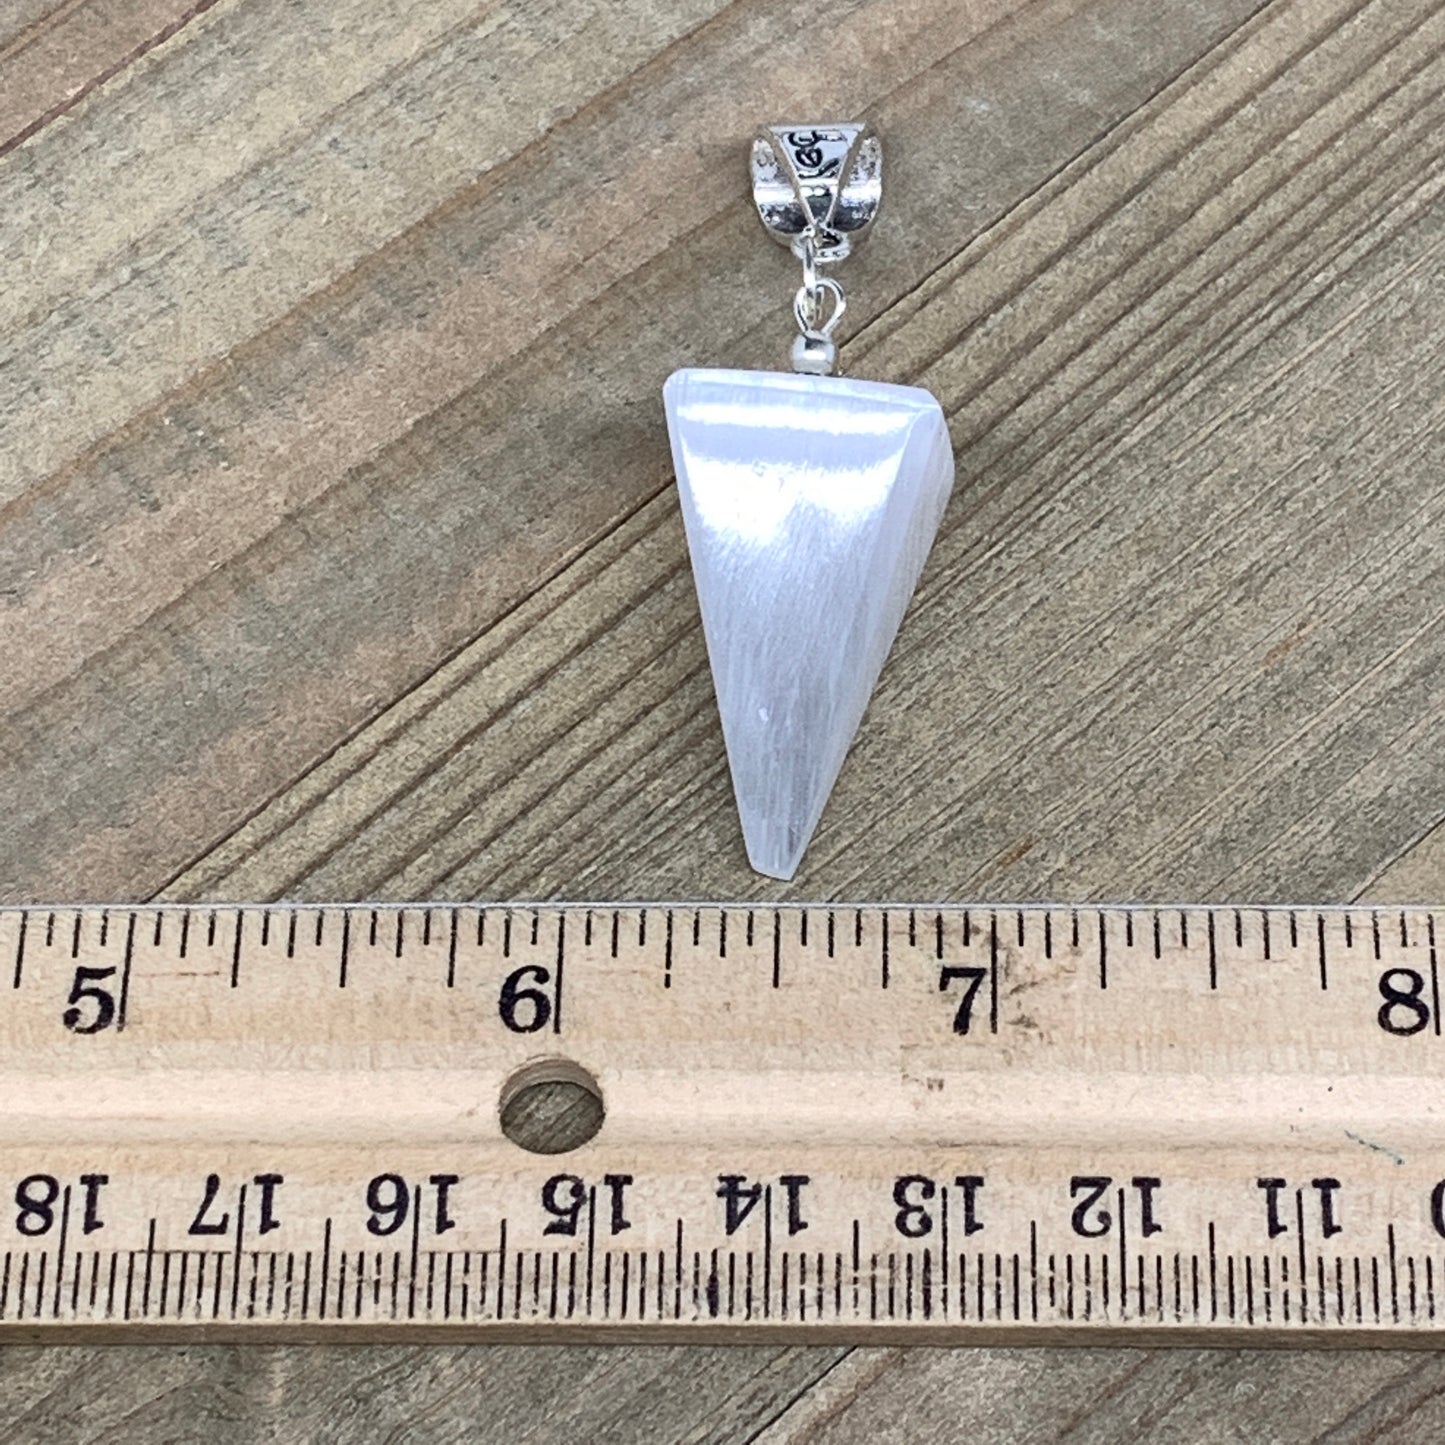 1pc, 7-10g, 1.1"-1.2" Selenite Pendant 4 Side Cone Shape Polished from Morocco,